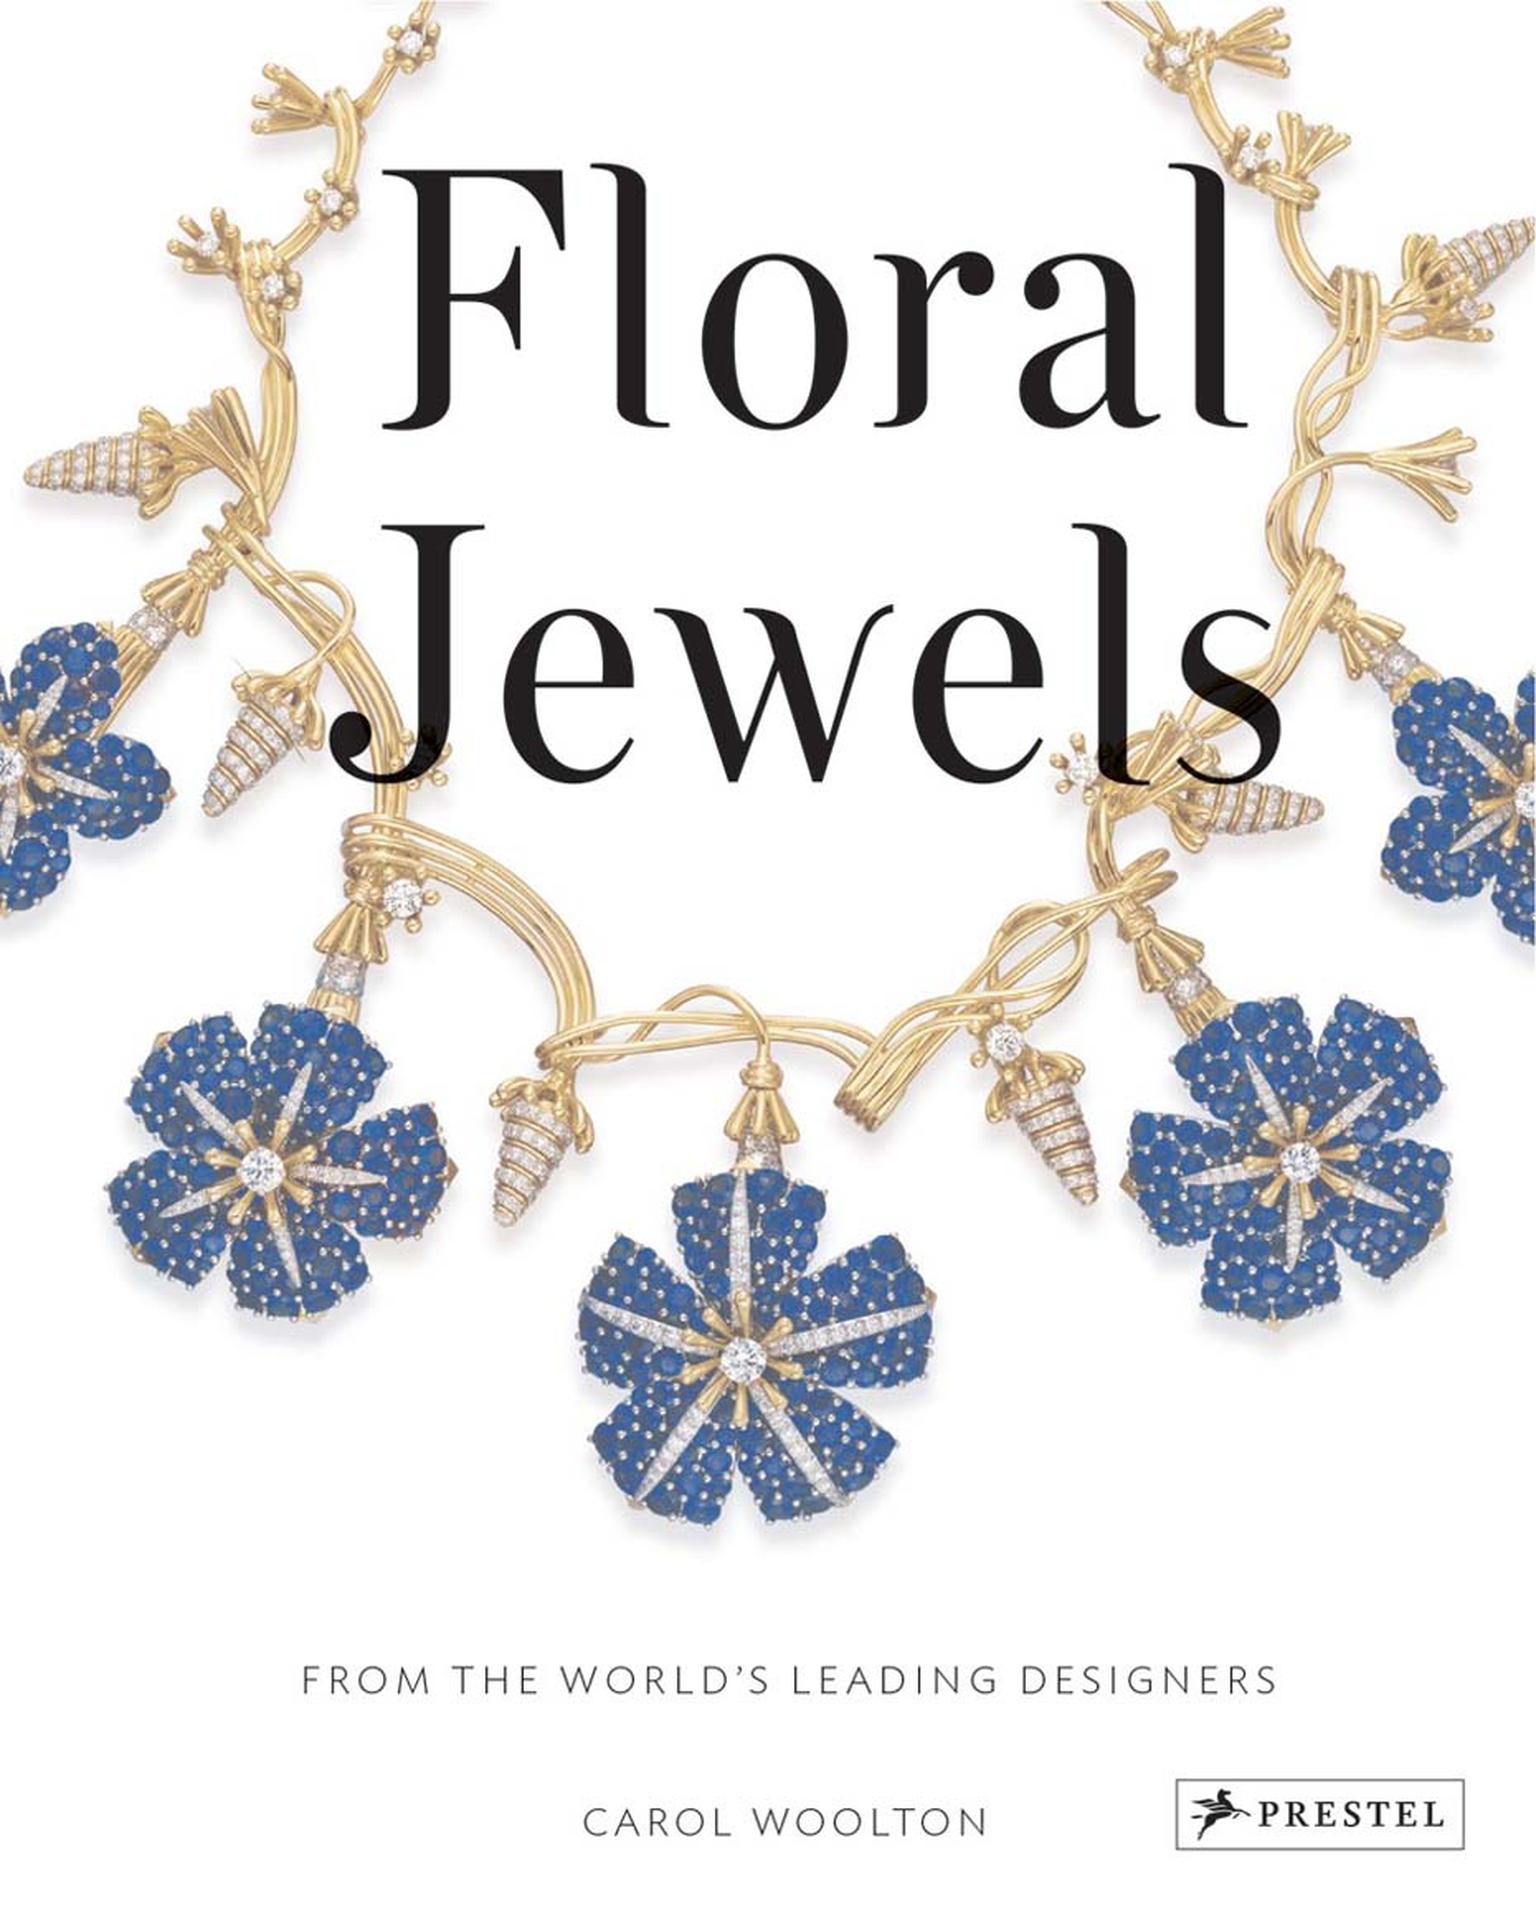 Inside her new book, author and jewellery editor of British Vogue, Carol Woolton, expertly guides the reader through the history of floral jewellery, accompanied by a series of 200 photographs, illustrations, original sketches and gouaches.